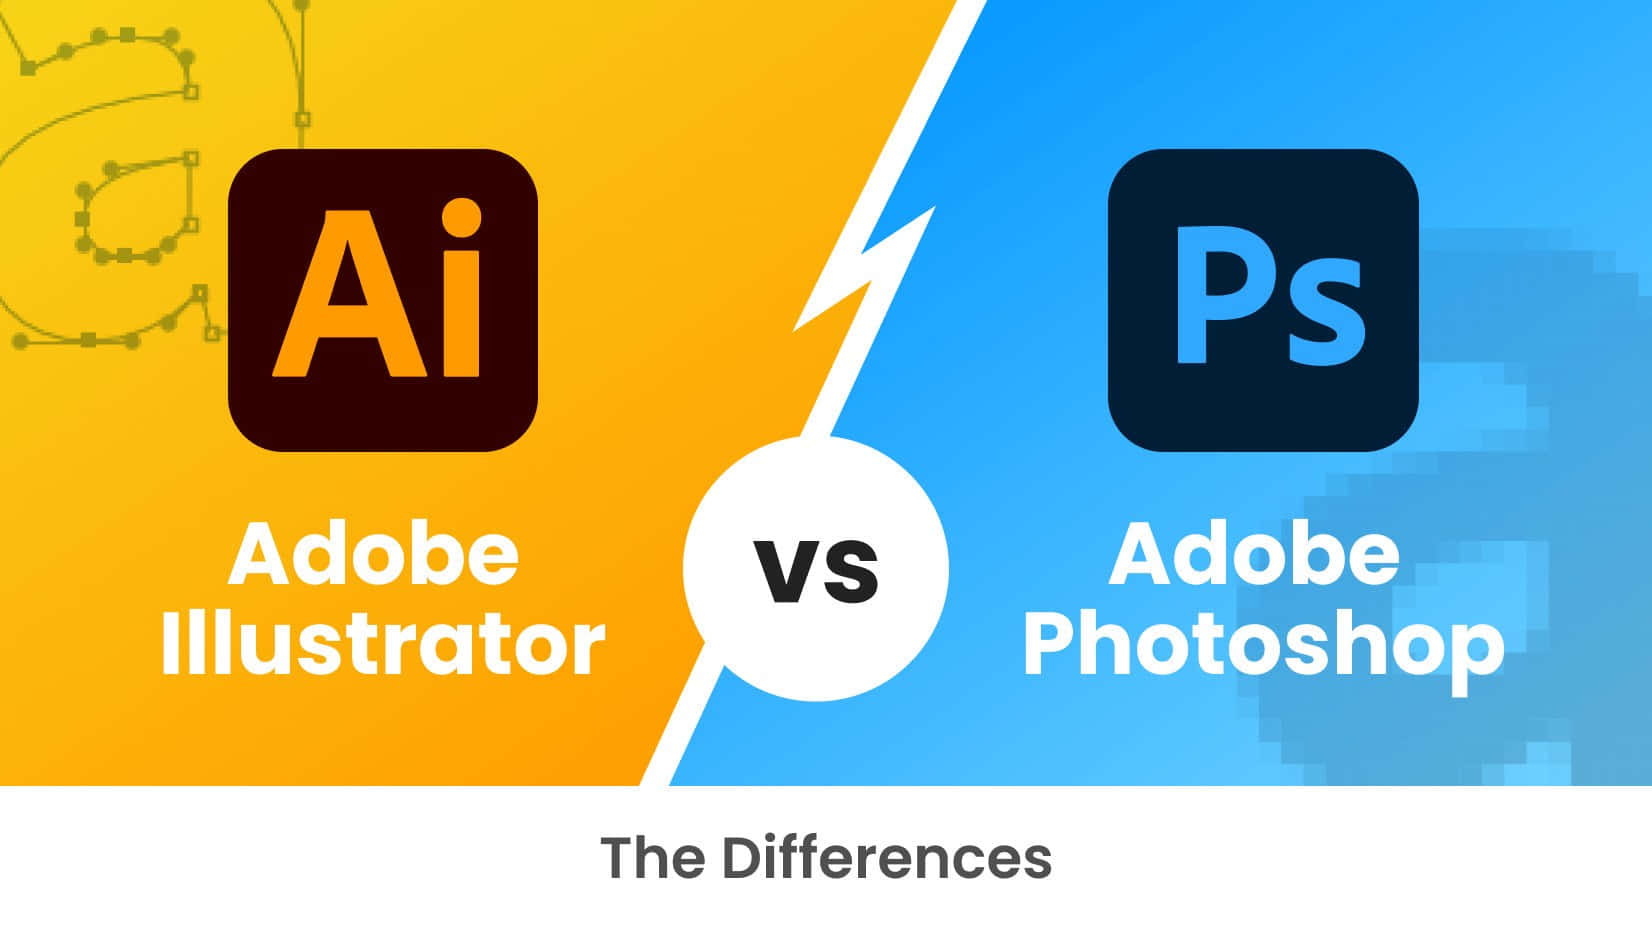 The power of Adobe.